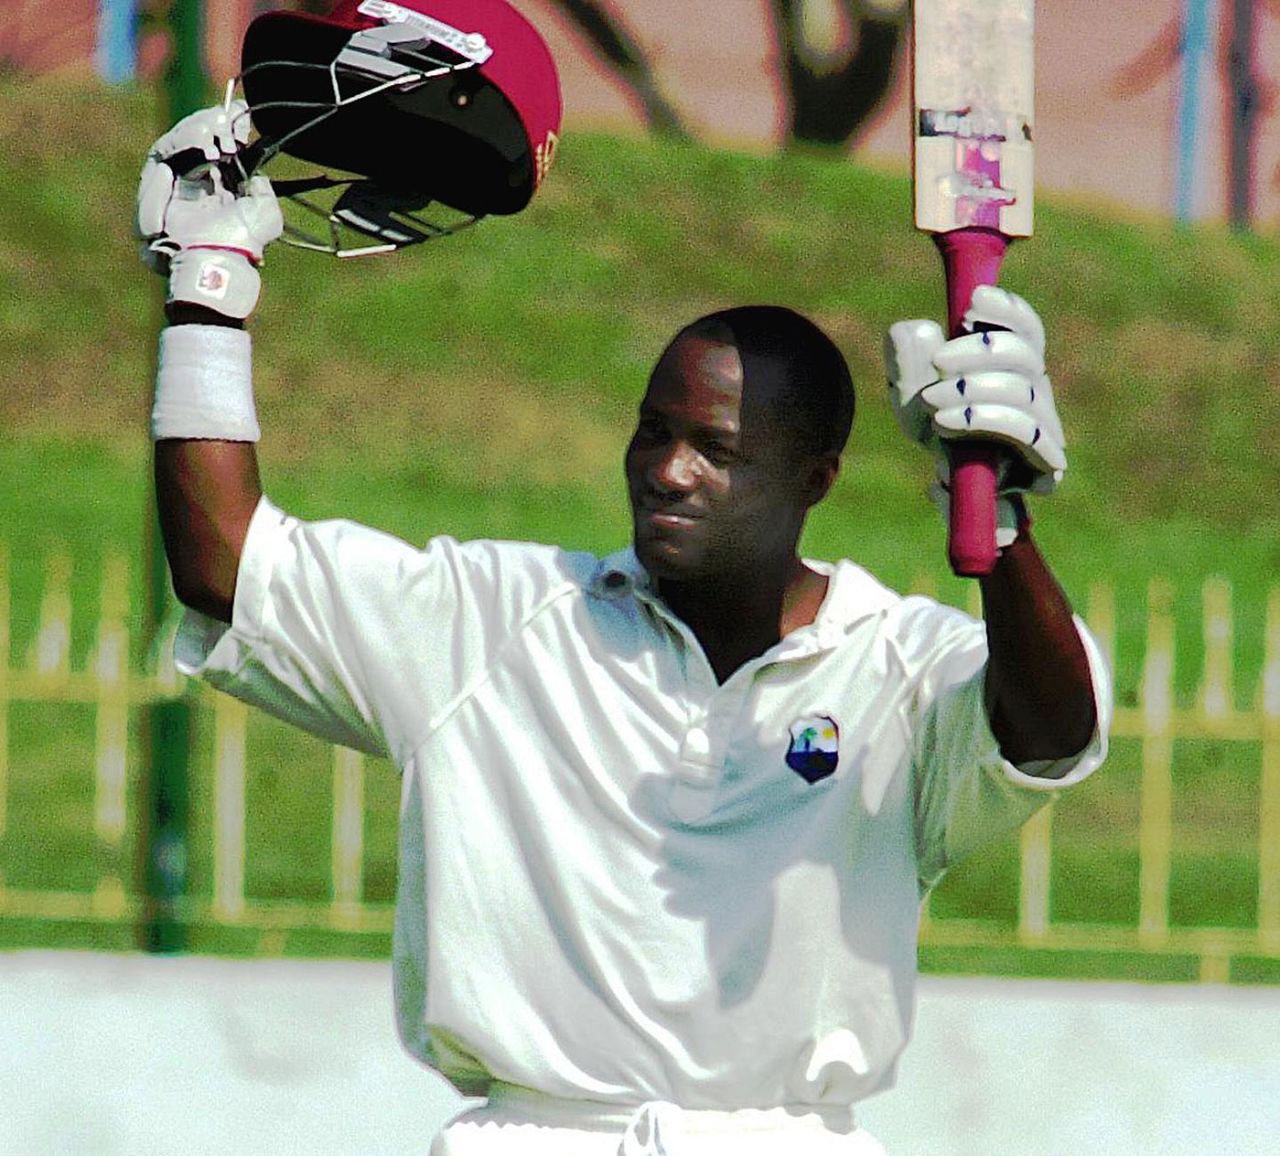 Brian Lara acknowledges the crowd after completing his 17th Test century, Sri Lanka v West Indies, 3rd Test, Colombo, 1st day, November 29, 2001